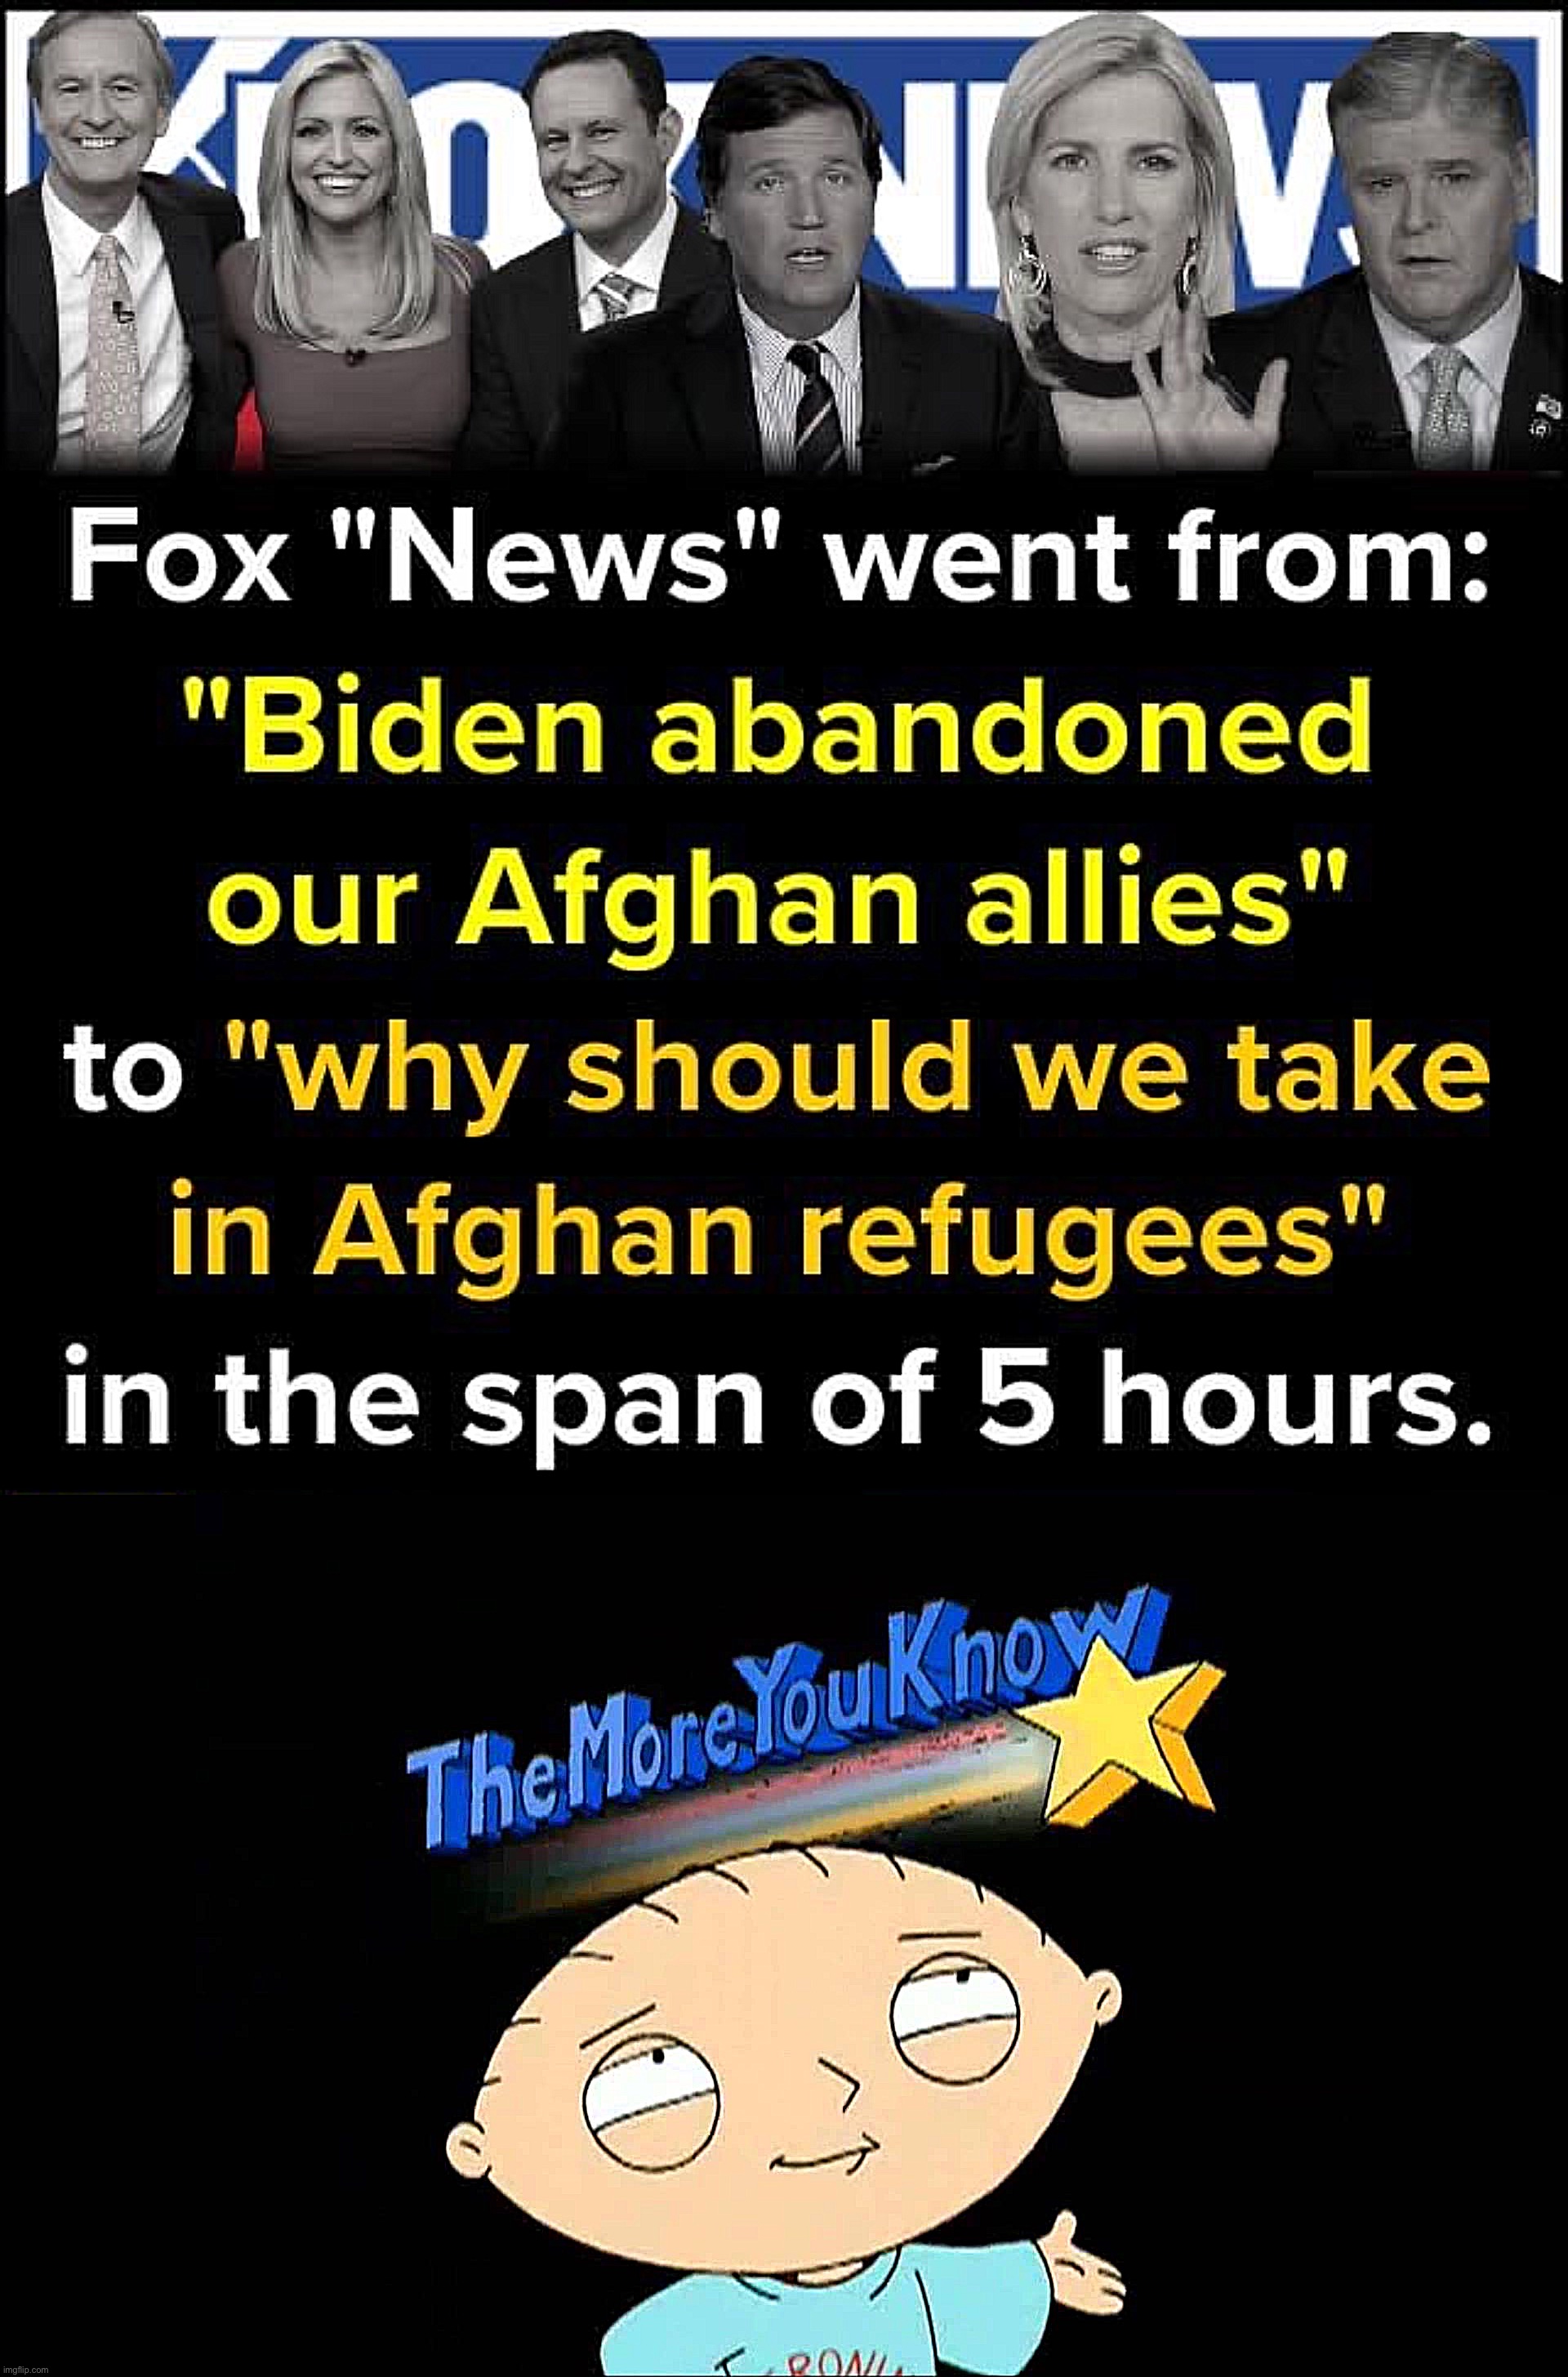 That’s weird | image tagged in fox news hypocrisy afghanistan,the more you know stewie,bigots,gop hypocrite,conservative hypocrisy,afghanistan | made w/ Imgflip meme maker